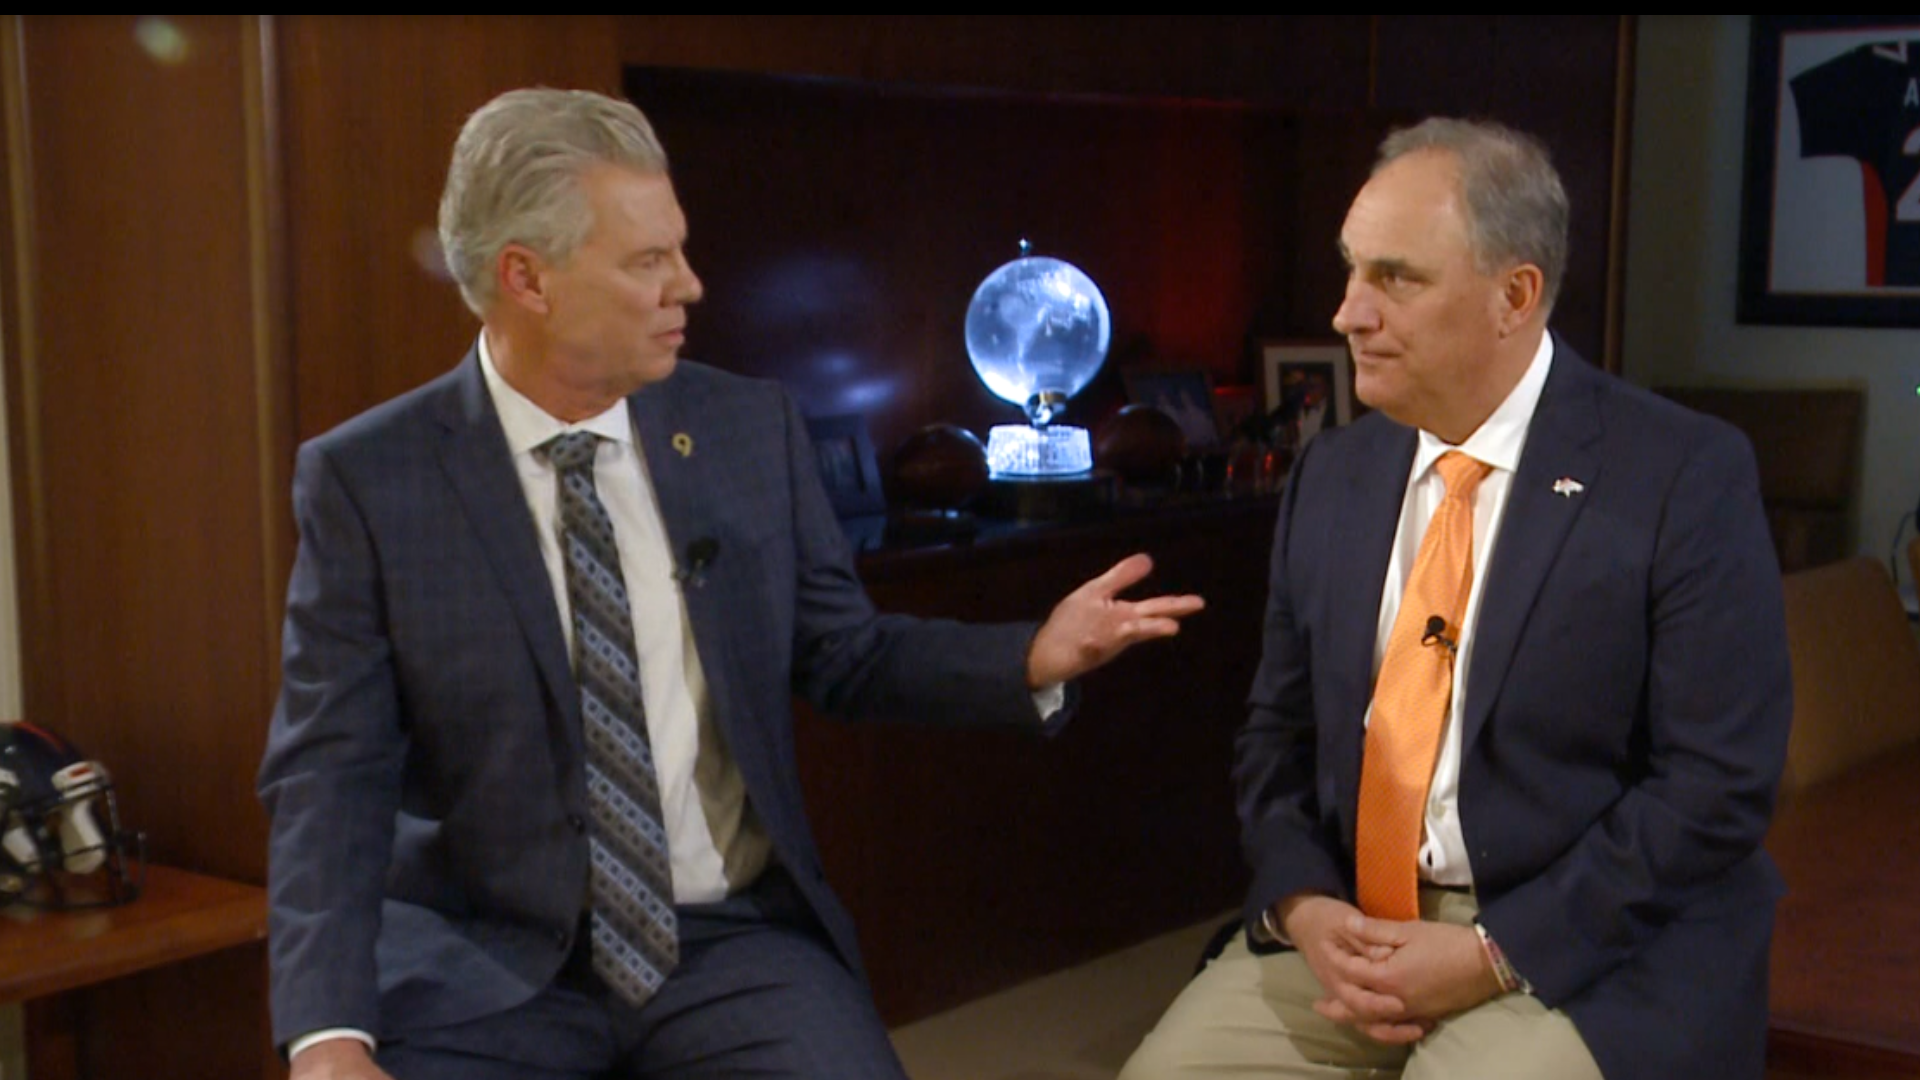 Broncos Insider Mike Klis sat down with new head coach Vic Fangio to discuss his future in Denver.